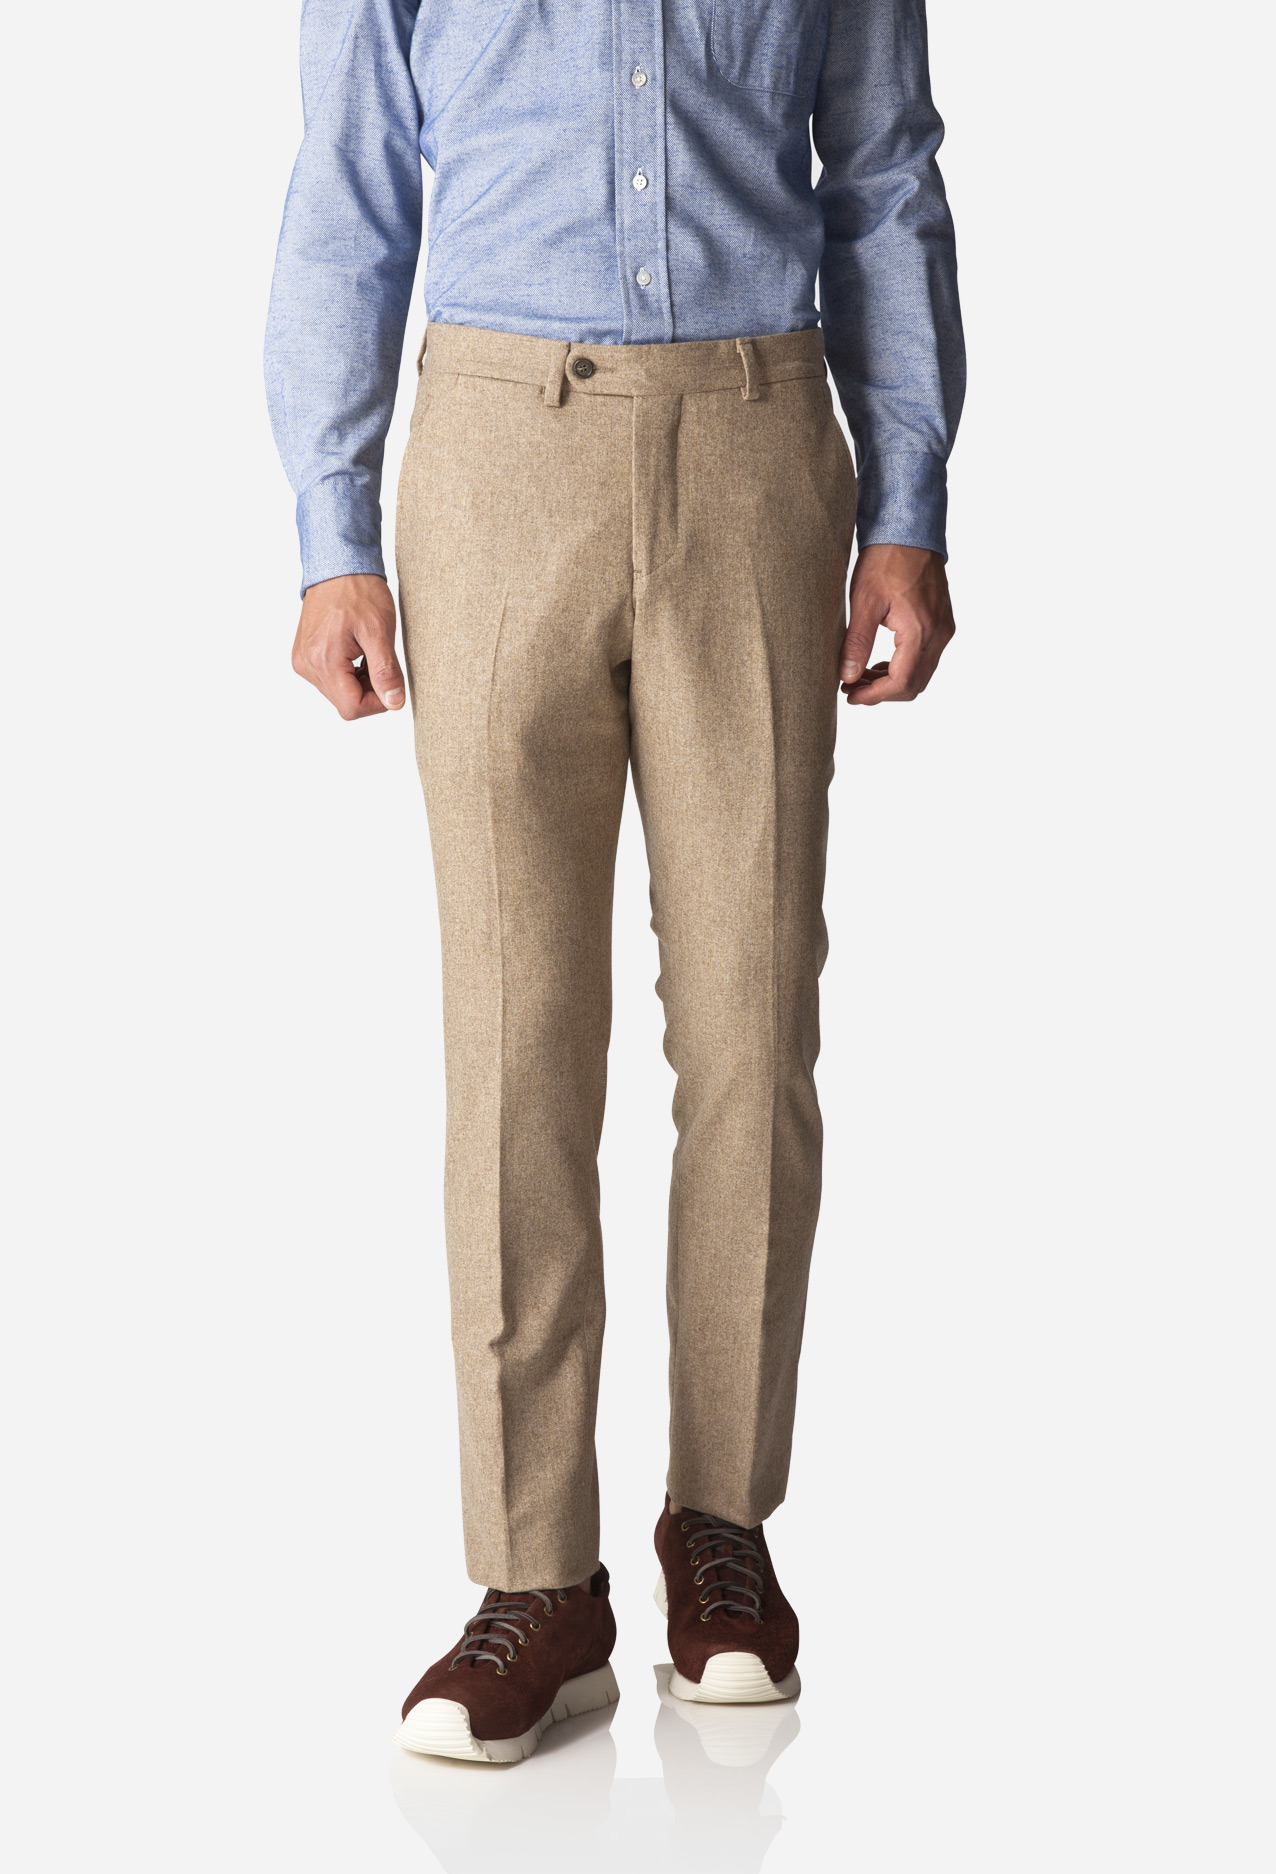 It’s On Sale: Carson Street Clothiers’ Trousers